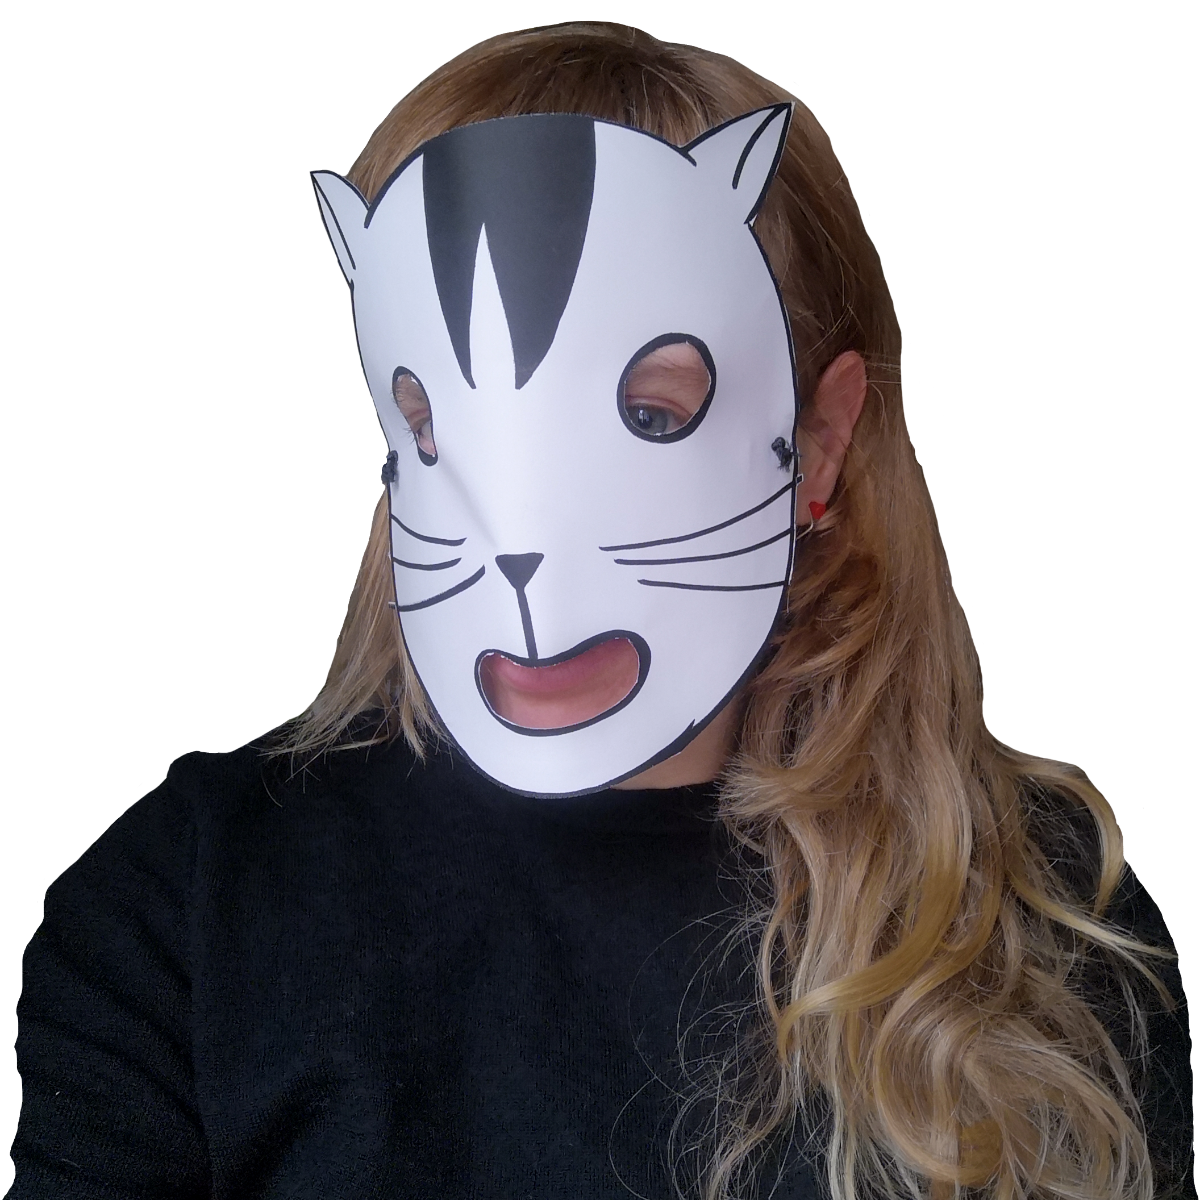 photo of Ulrike Uhlig with a paper mask showing a cat face